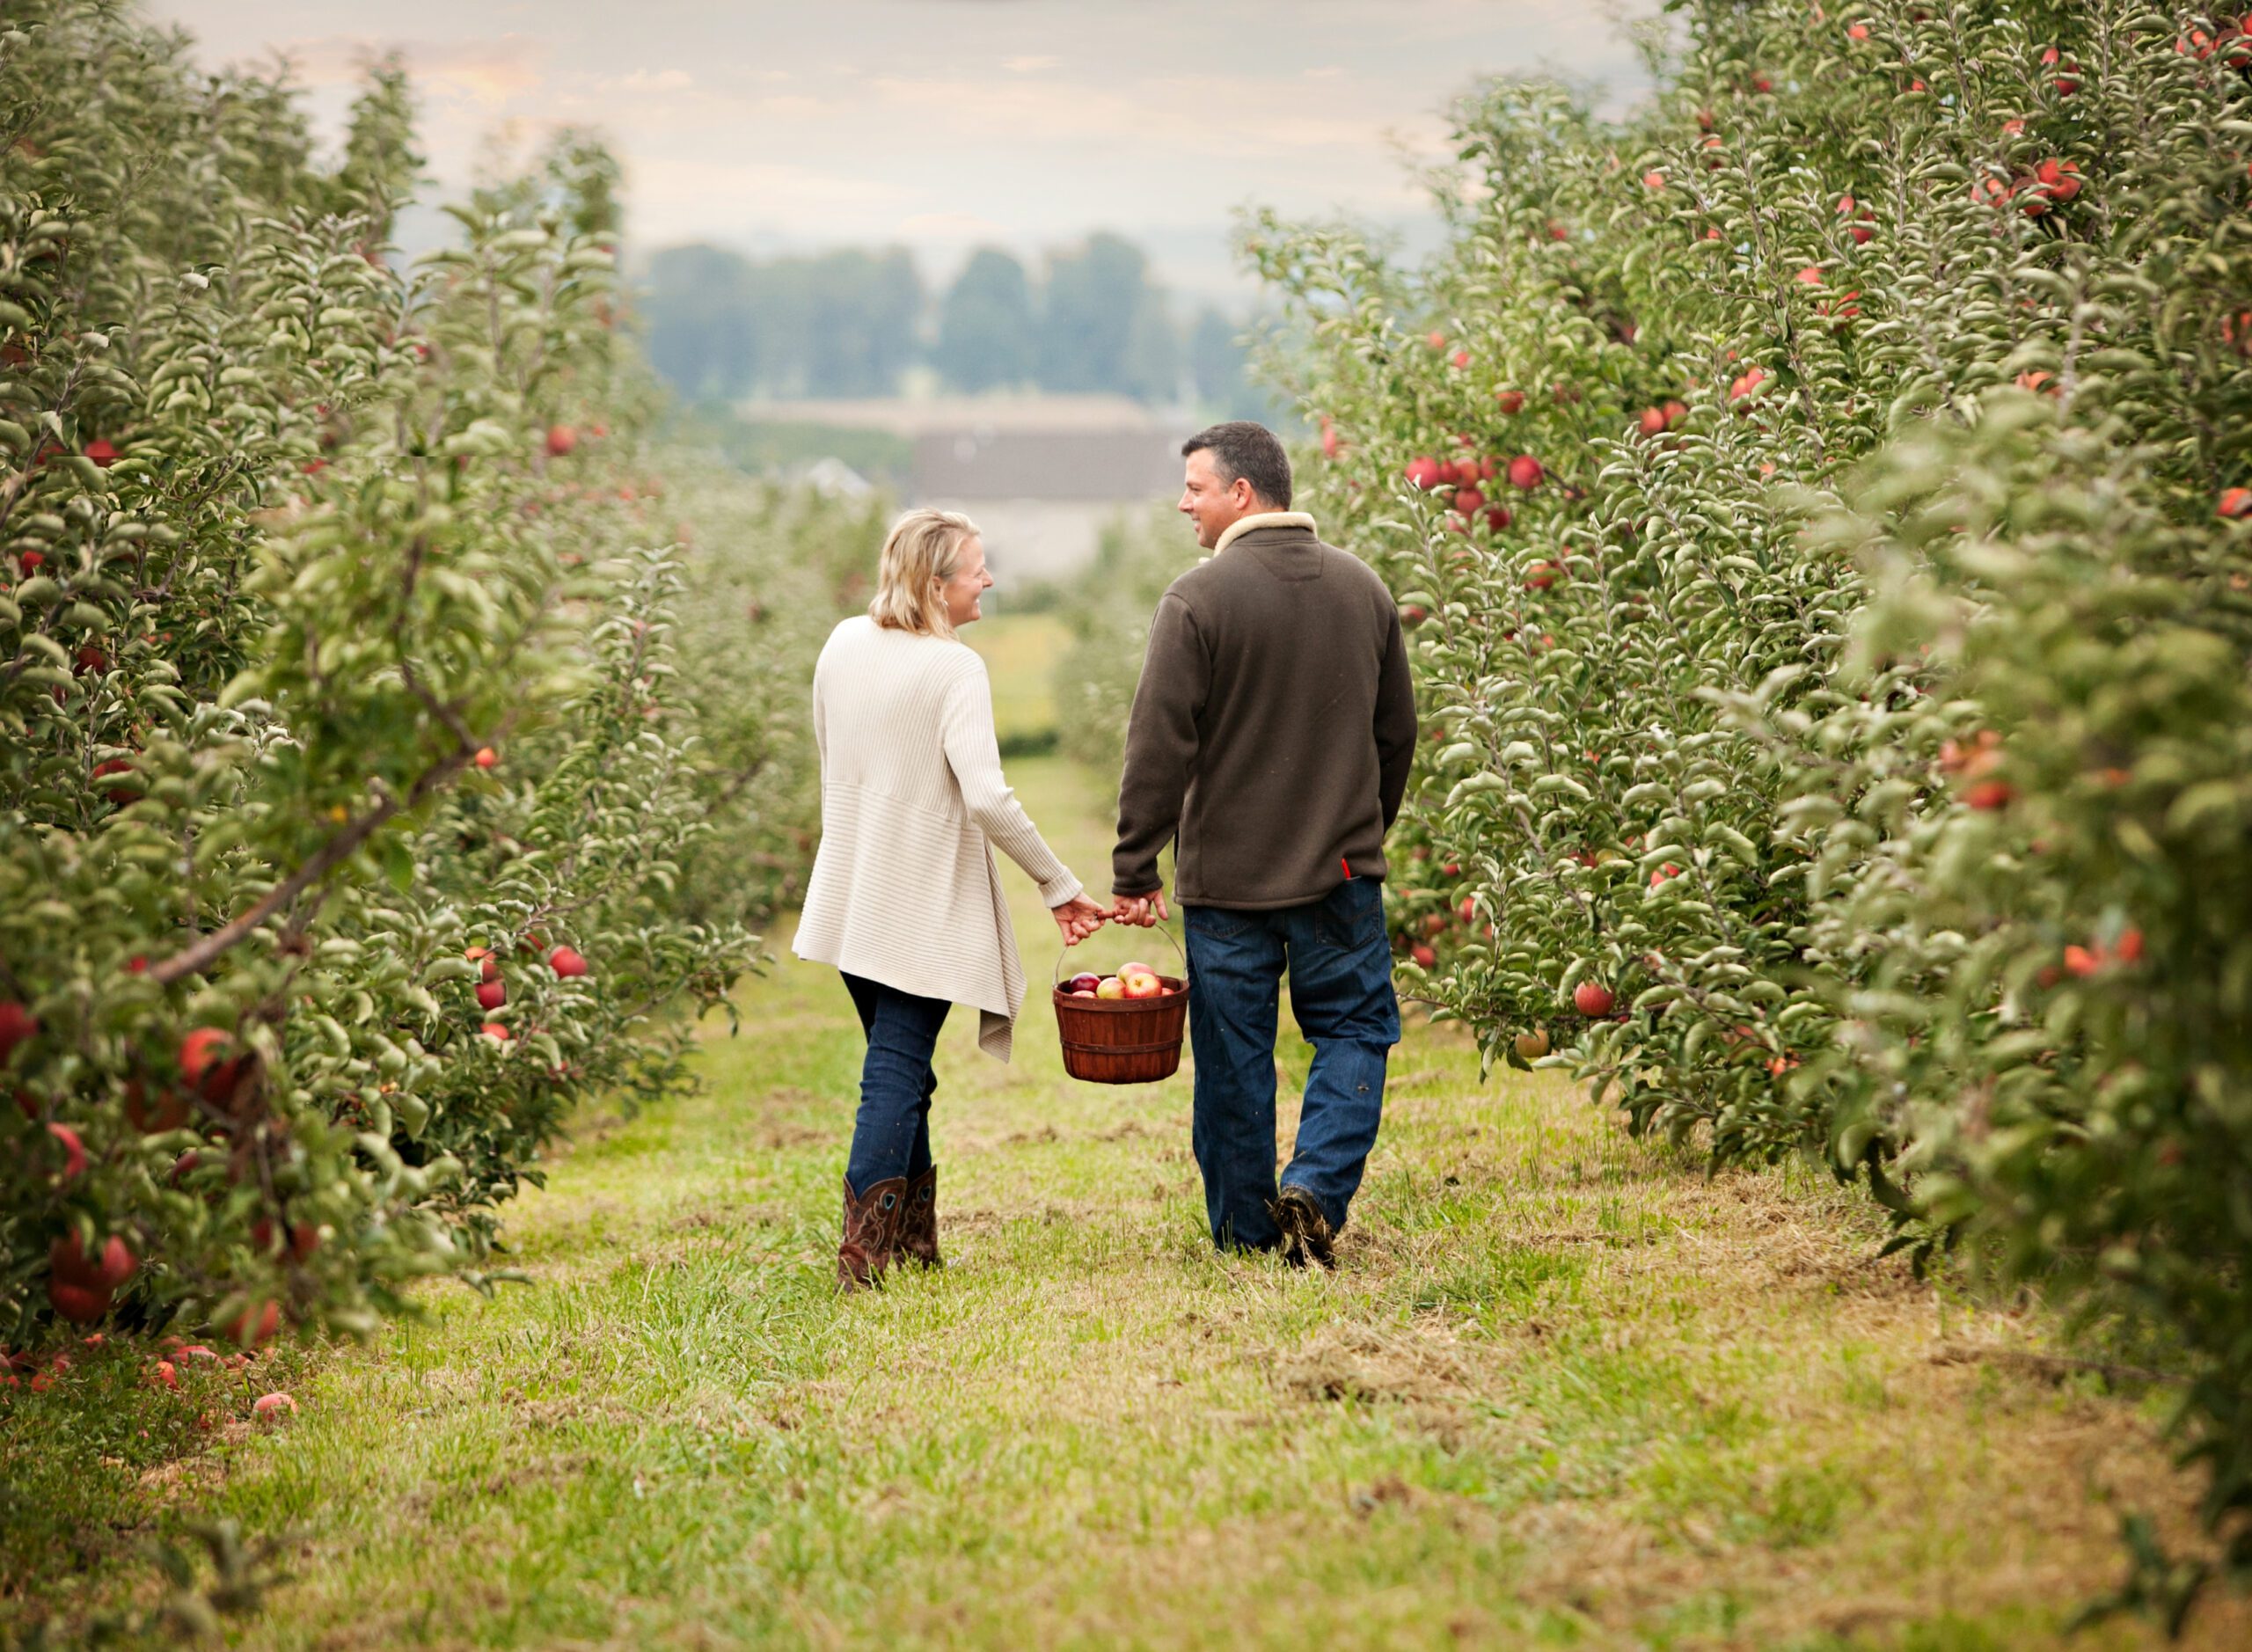 Two individuals are walking between rows of apple trees, holding hands and carrying a basket of apples.